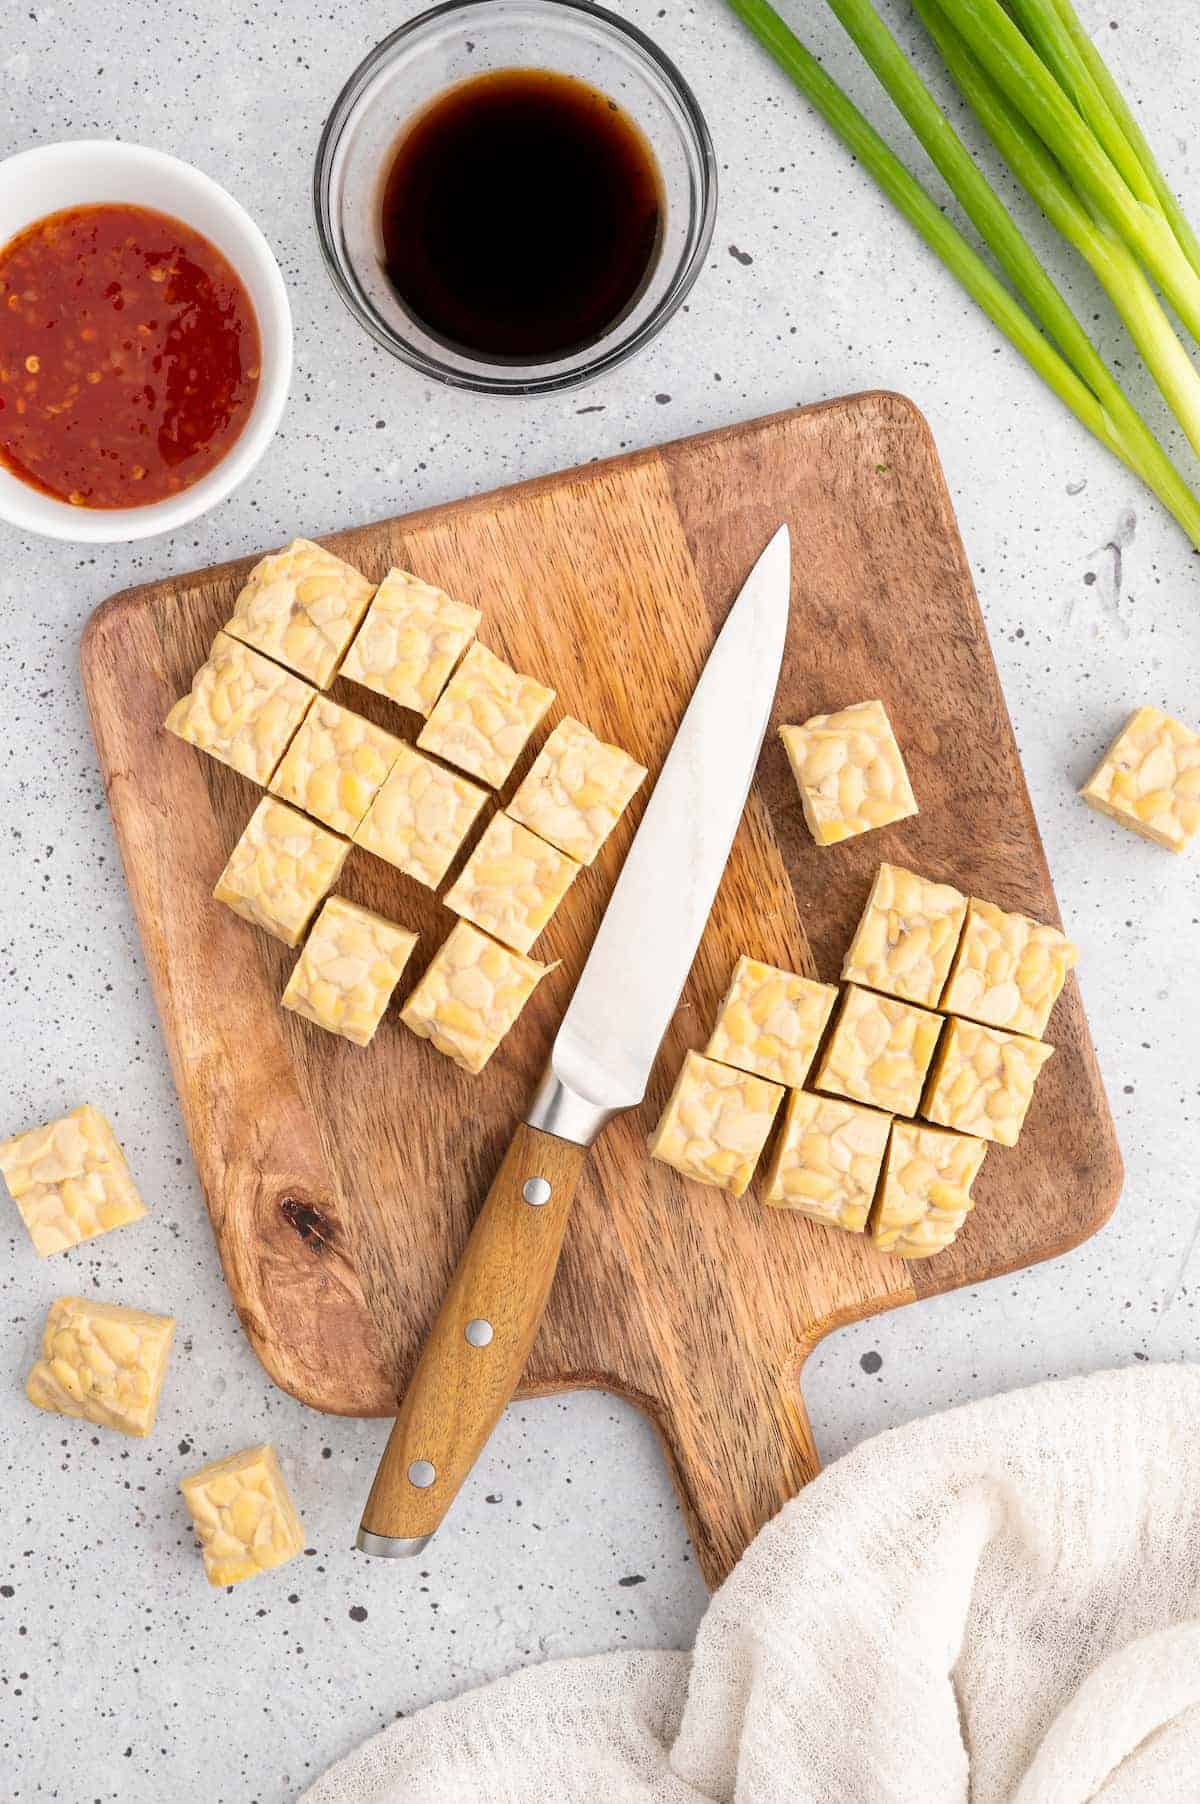 Cubed tempeh on a cutting board.